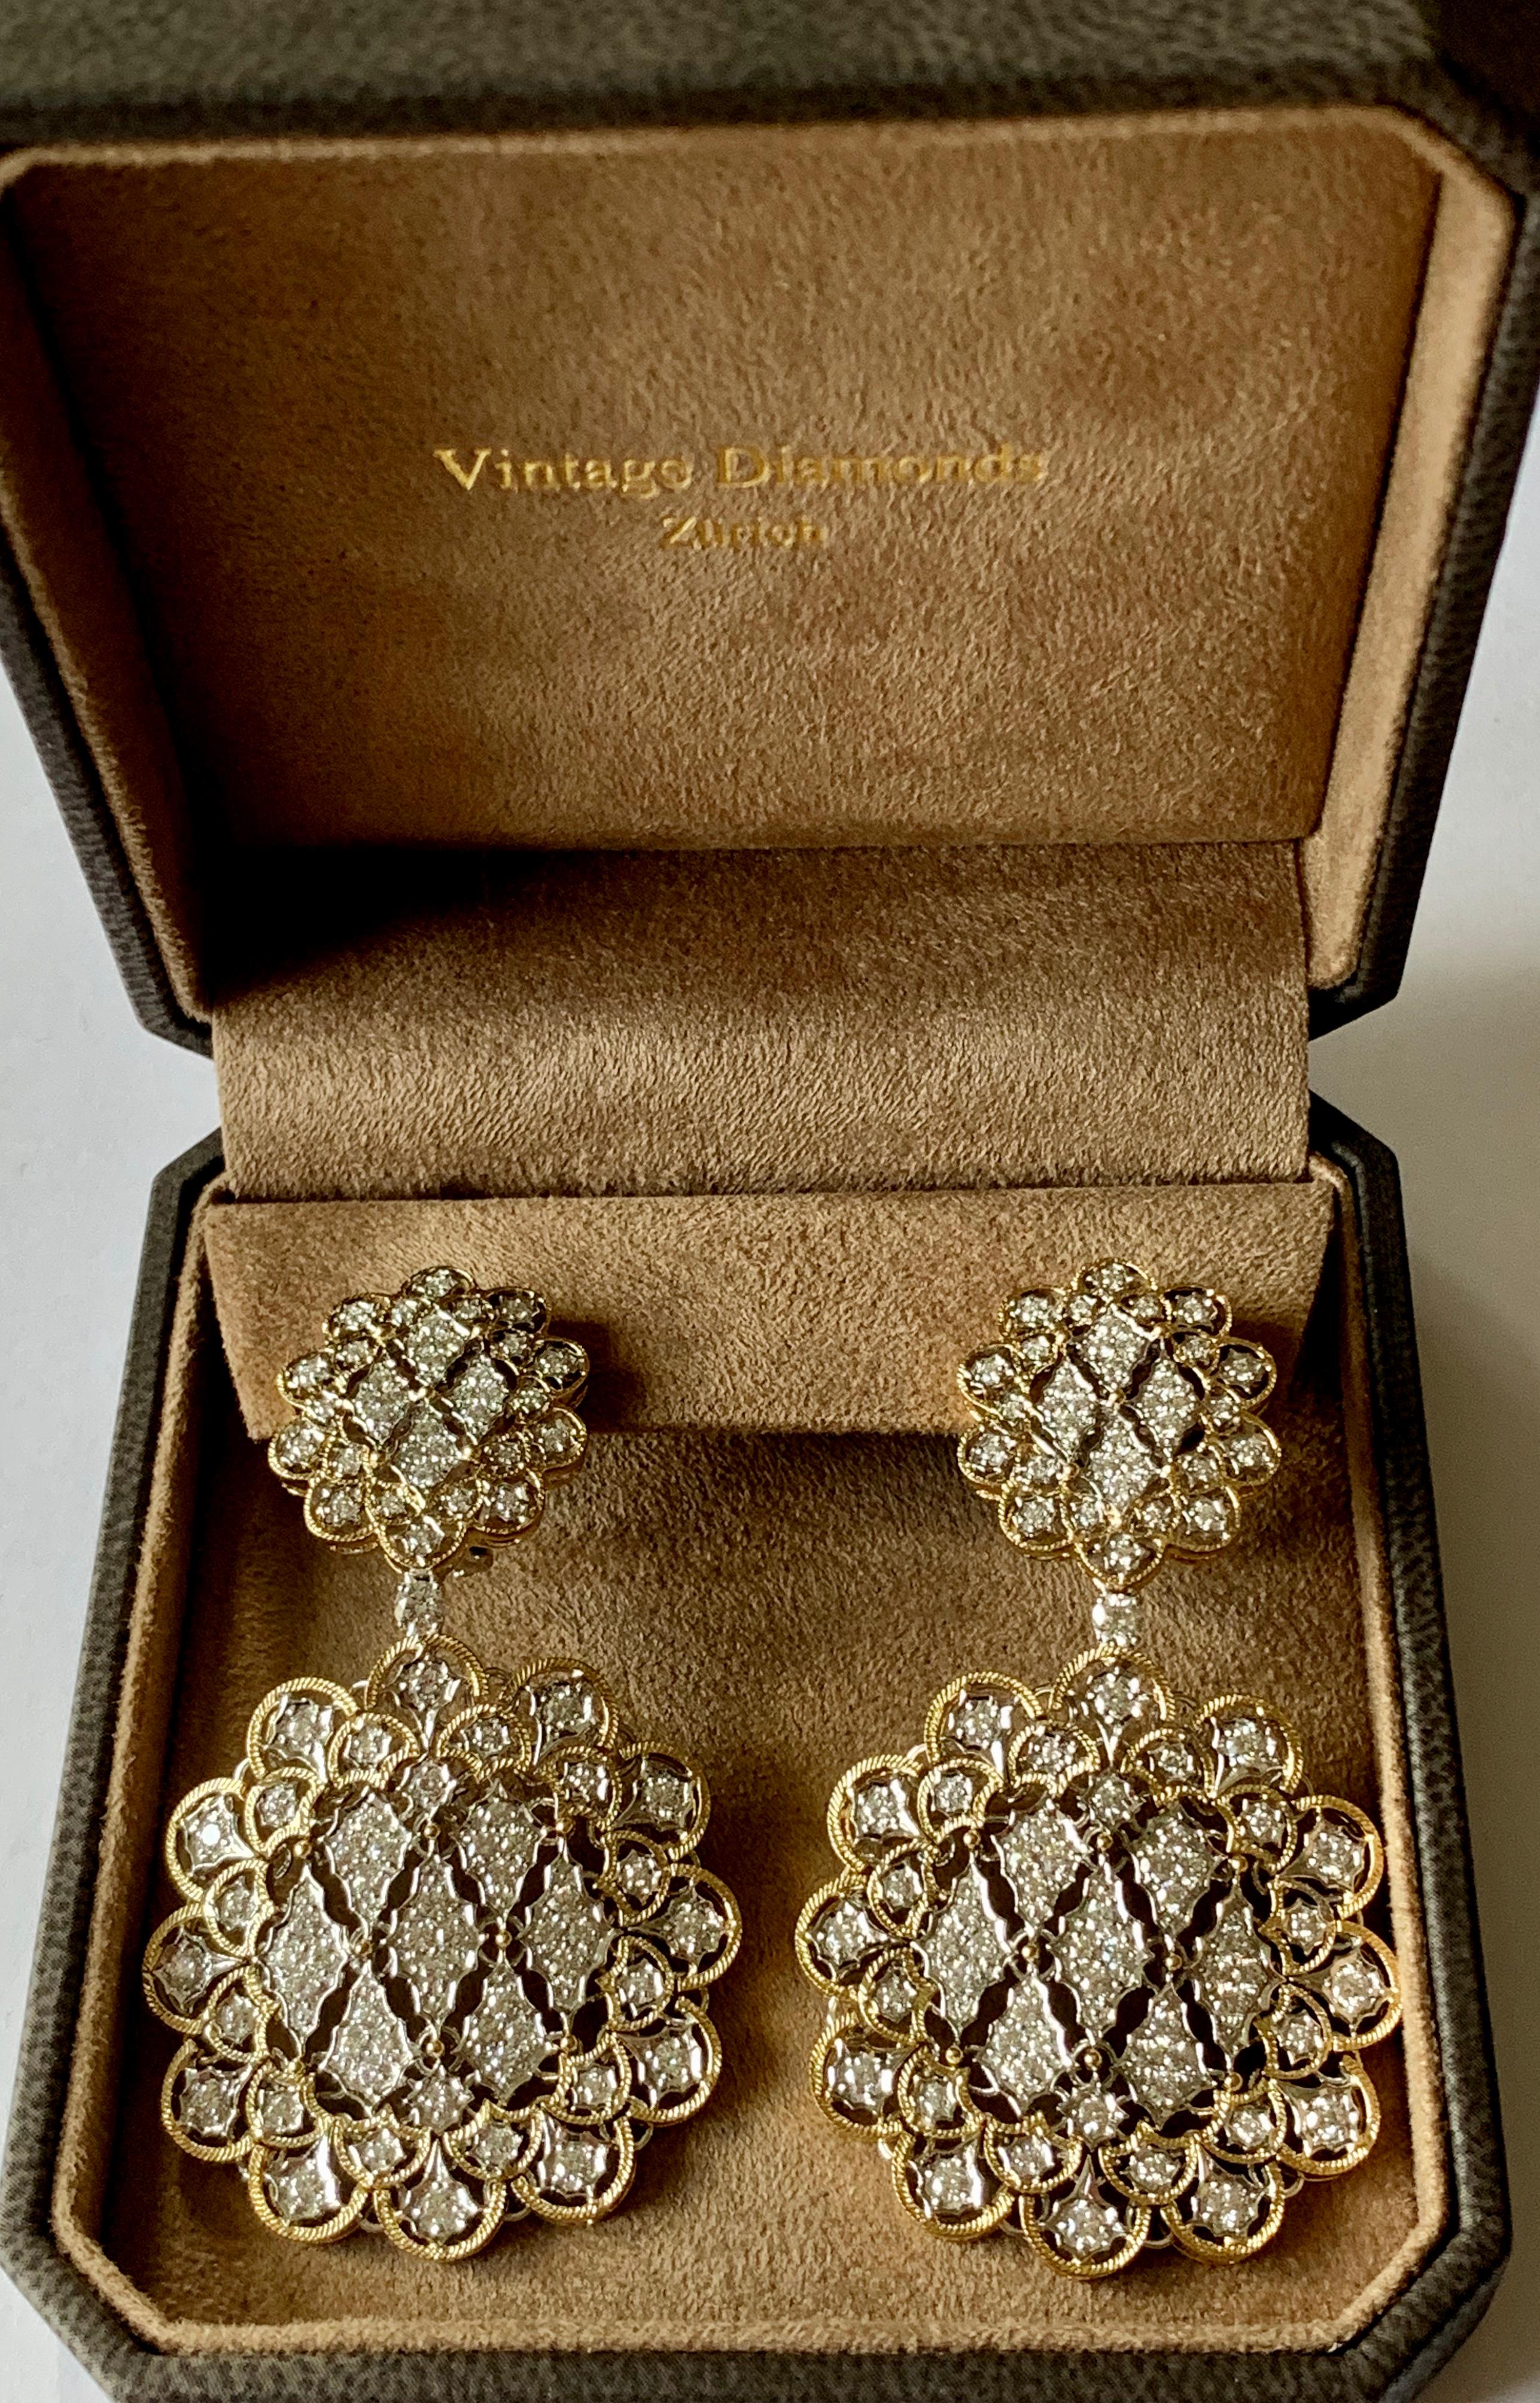 Pair of Glorious 18 Karat White and Yellow Gold Earrings with Diamonds For Sale 3